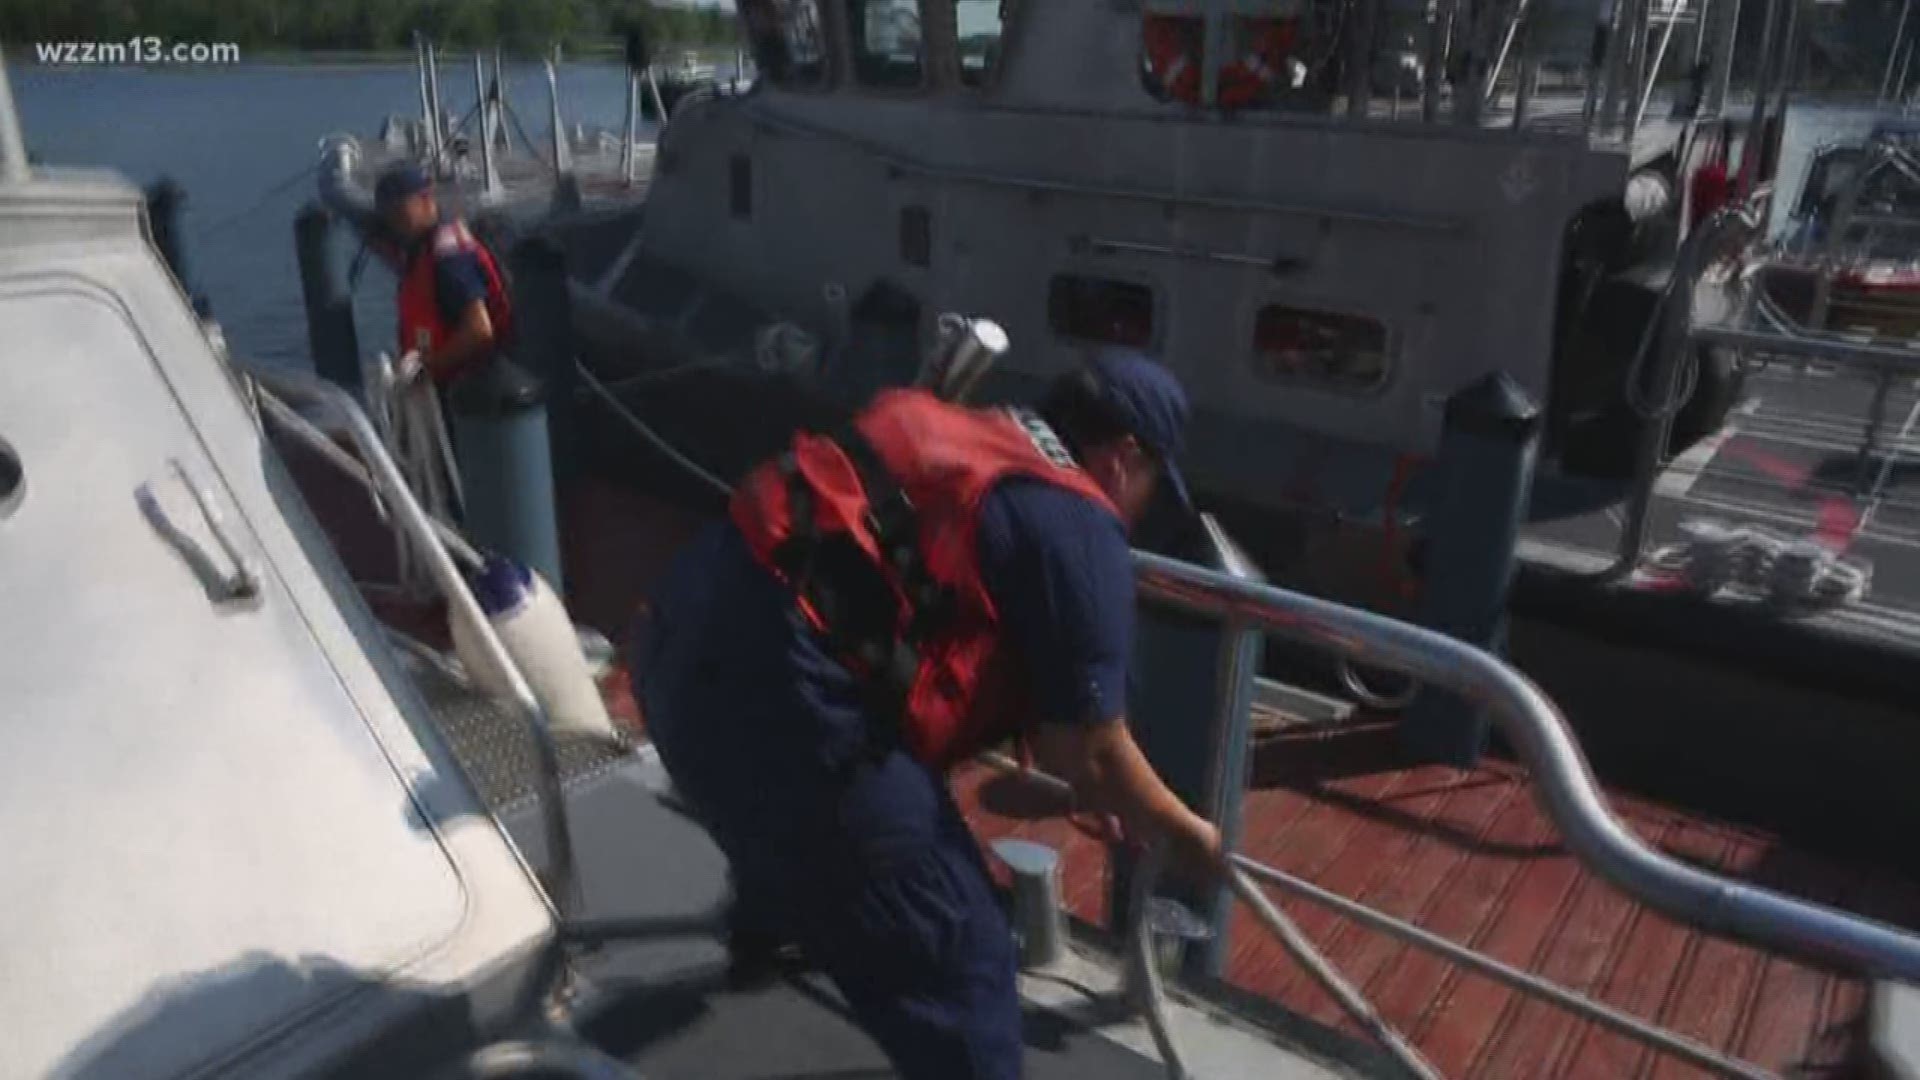 Coast Guard makes changes to coverage